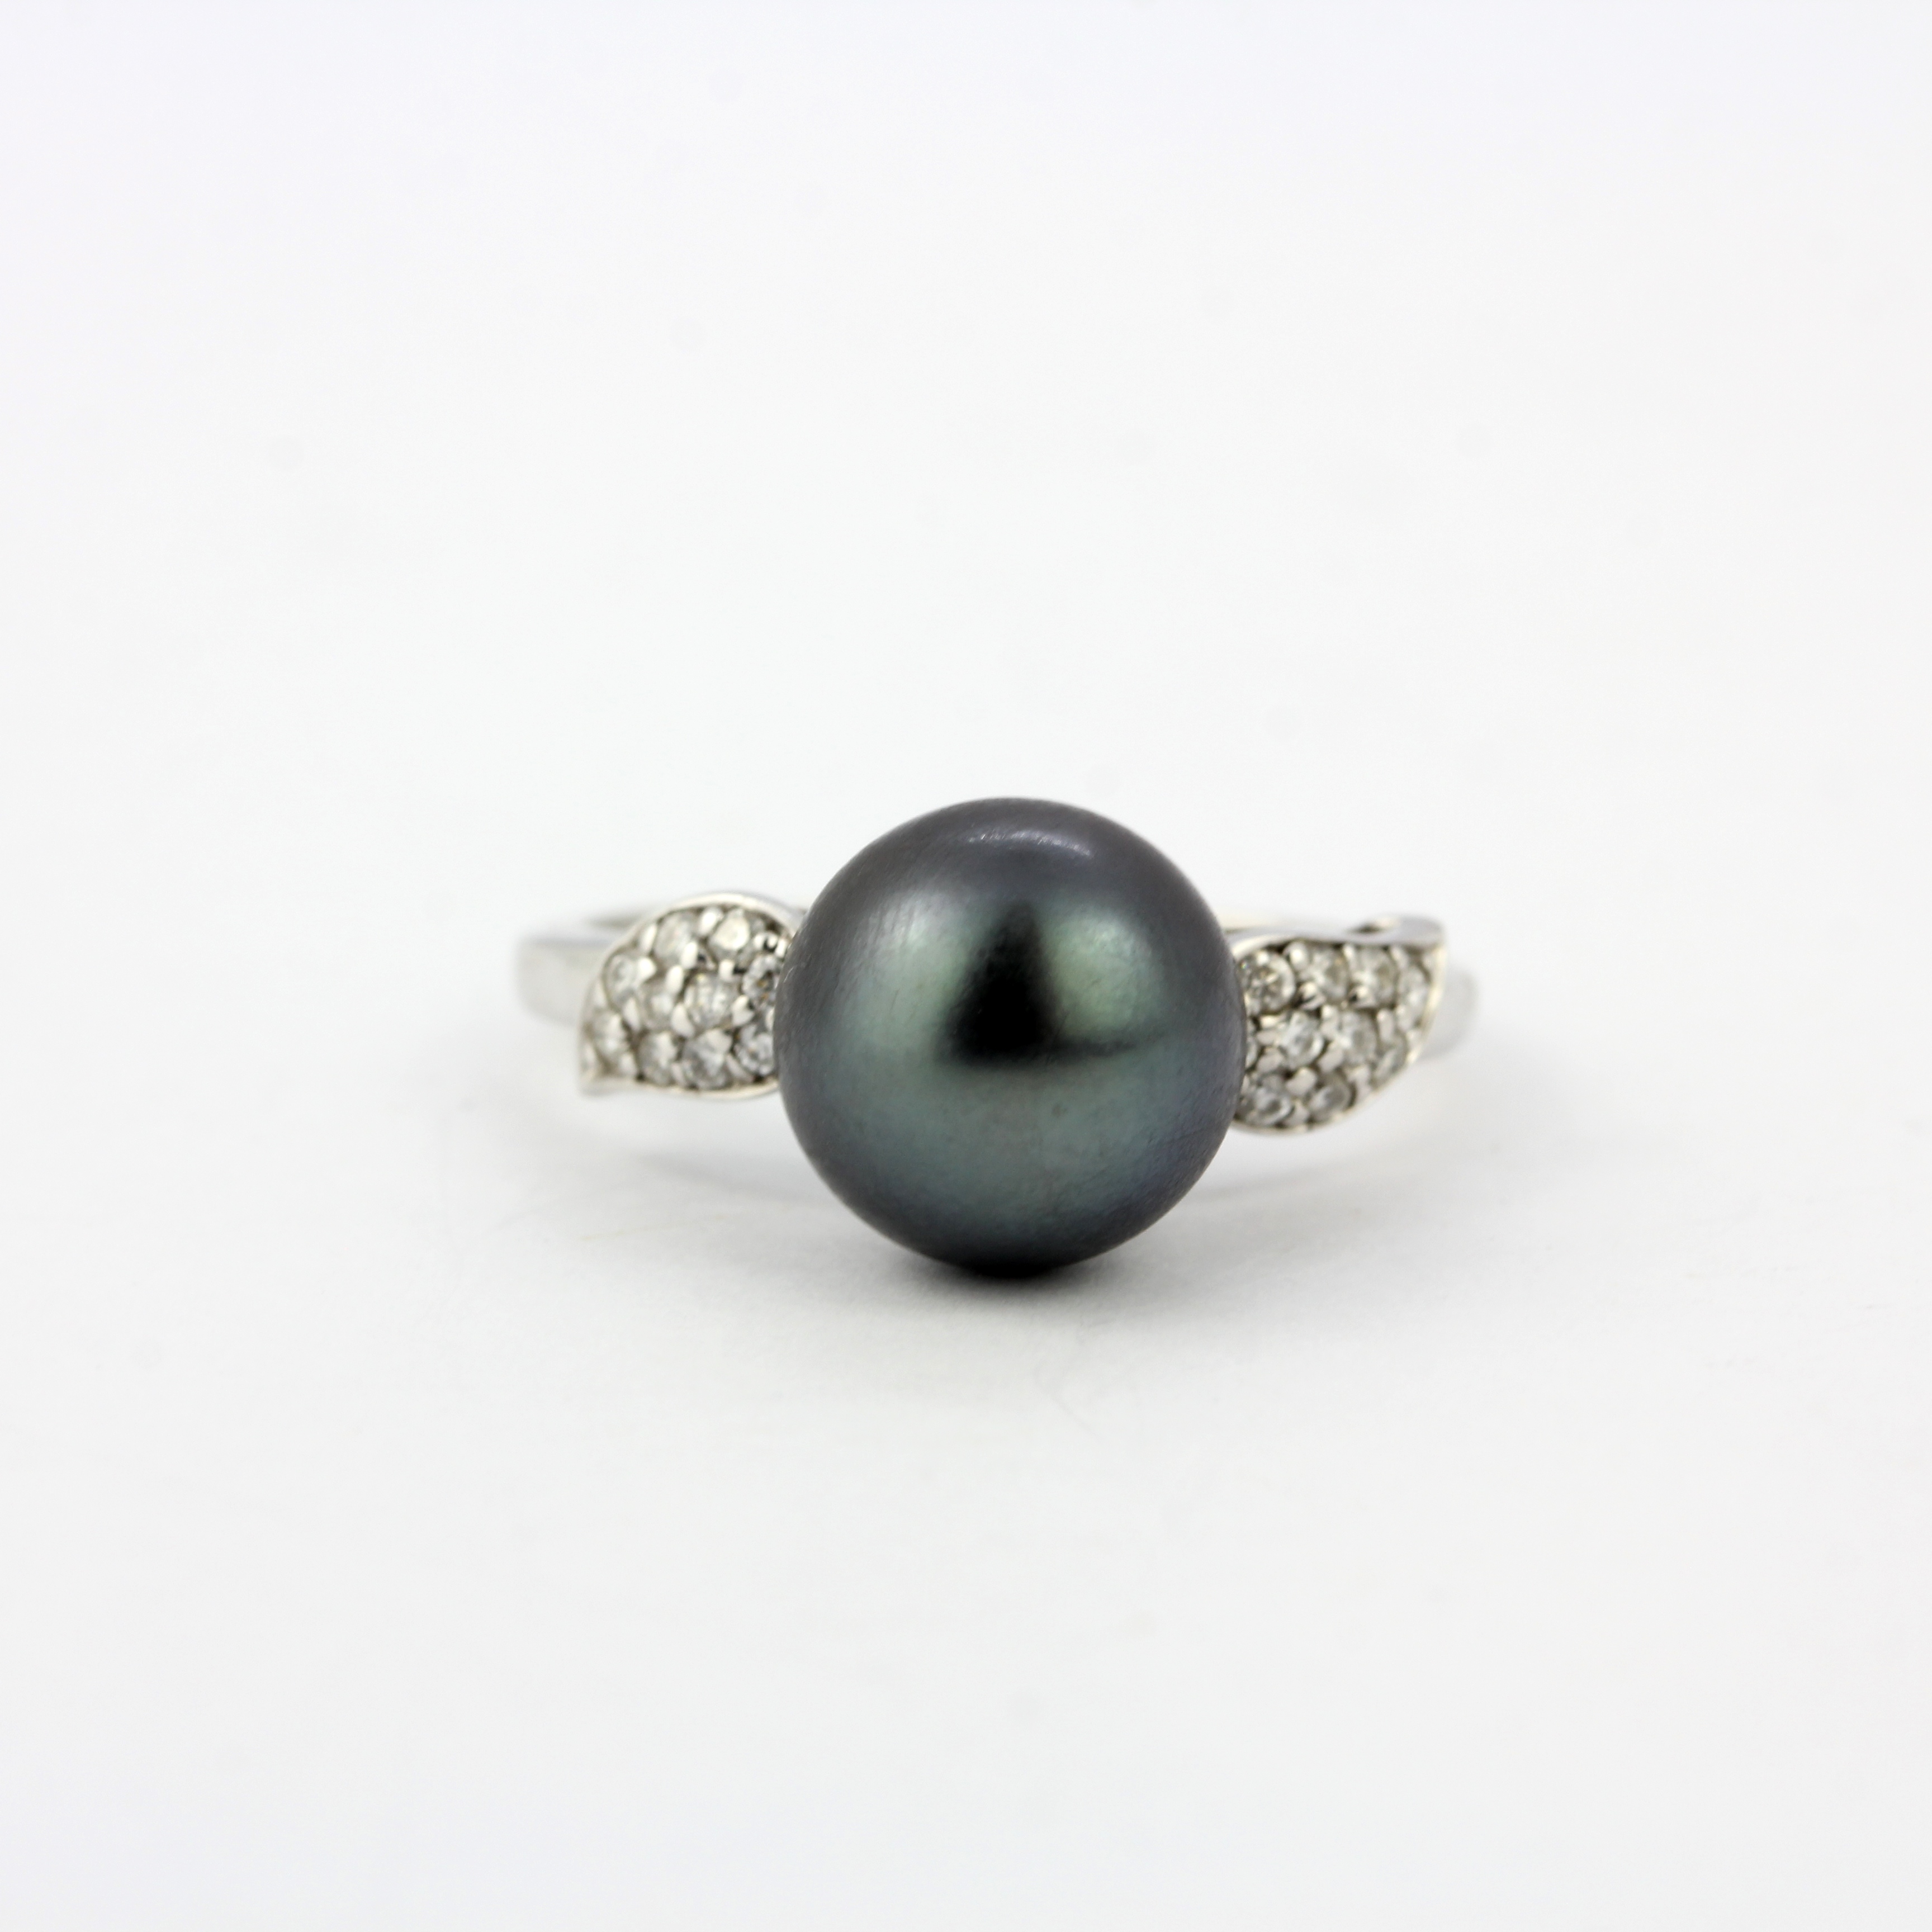 A 9ct white gold ring set with a black Tahitian pearl and diamond set shoulders, ring size S.5.